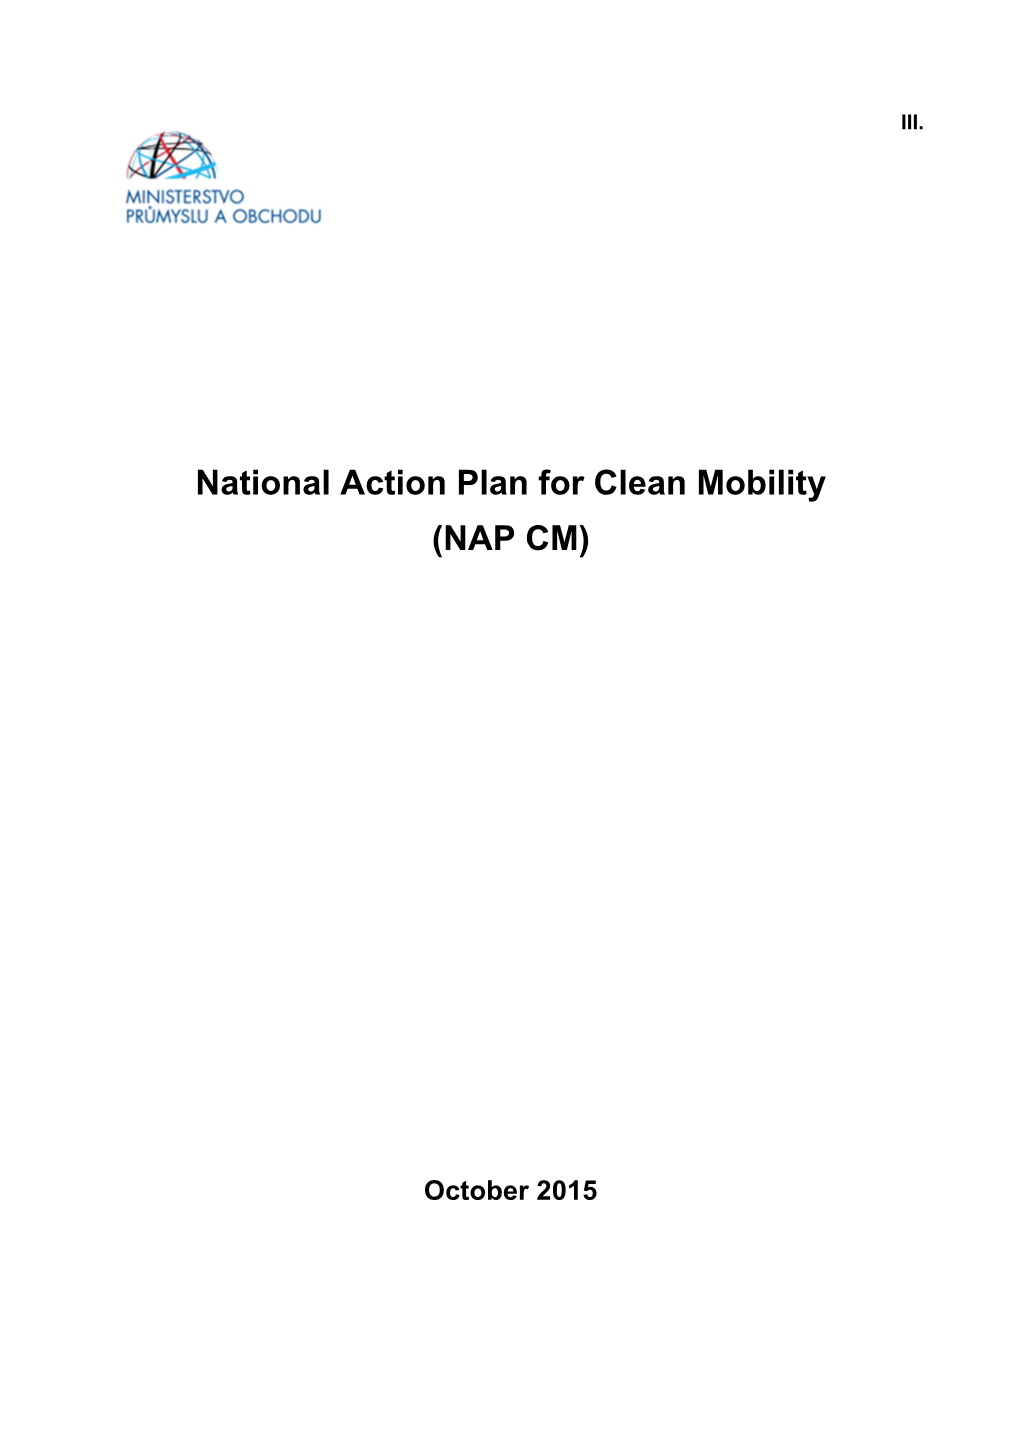 National Action Plan for Clean Mobility (NAP CM)